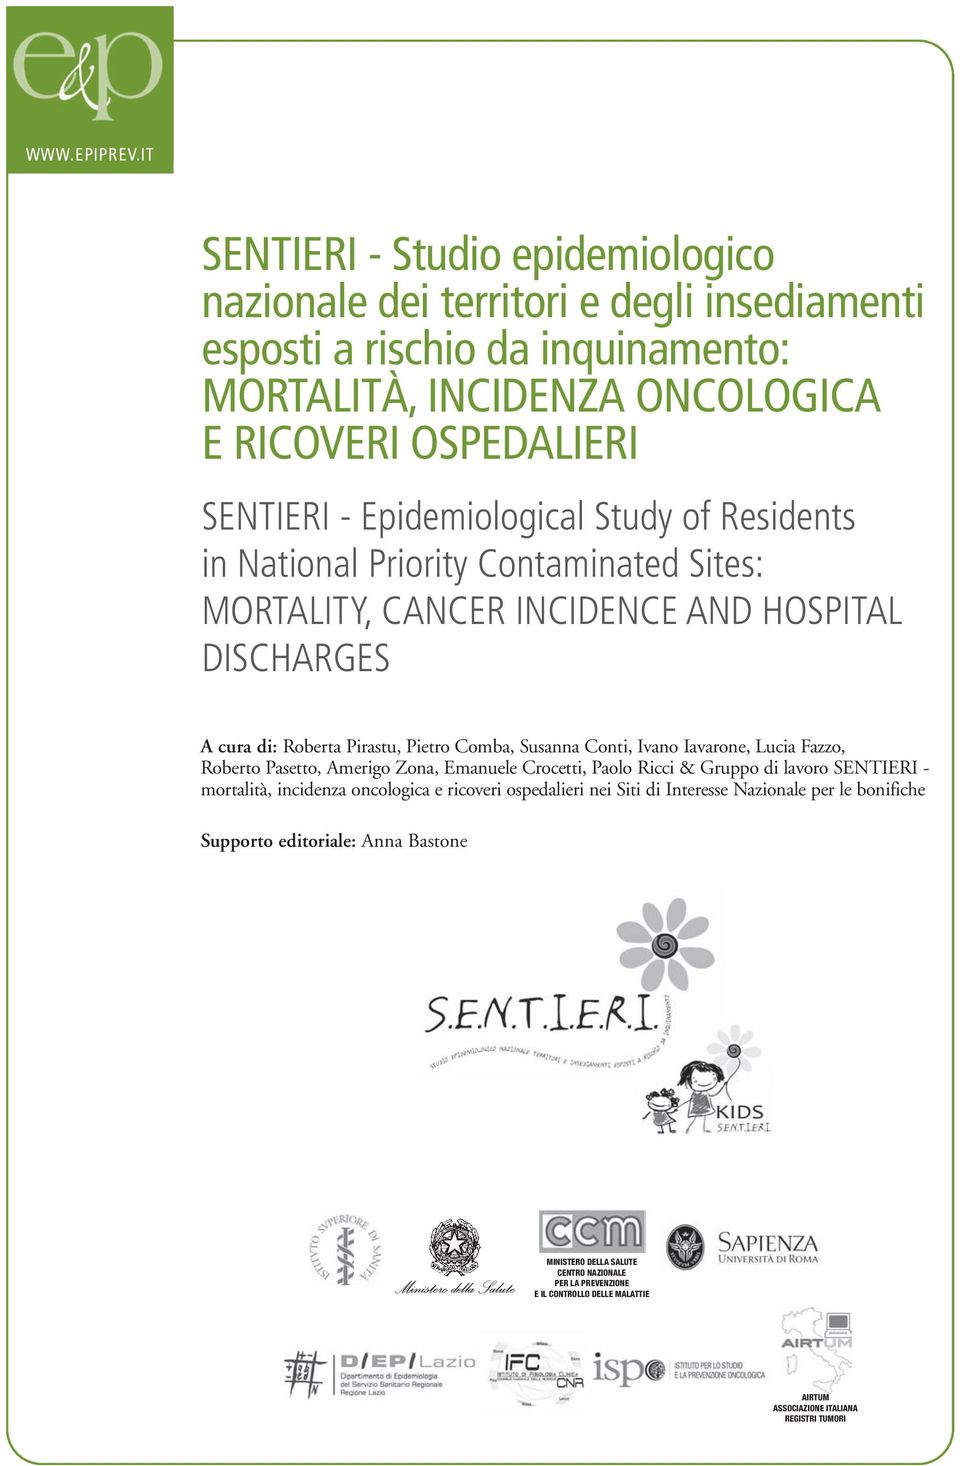 Study of Residents in National Priority Contaminated Sites: MORTALITY, CANCER INCIDENCE AND HOSPITAL DISCHARGES A cura di: Roberta Pirastu, Pietro Comba, Susanna Conti, Ivano Iavarone, Lucia Fazzo,